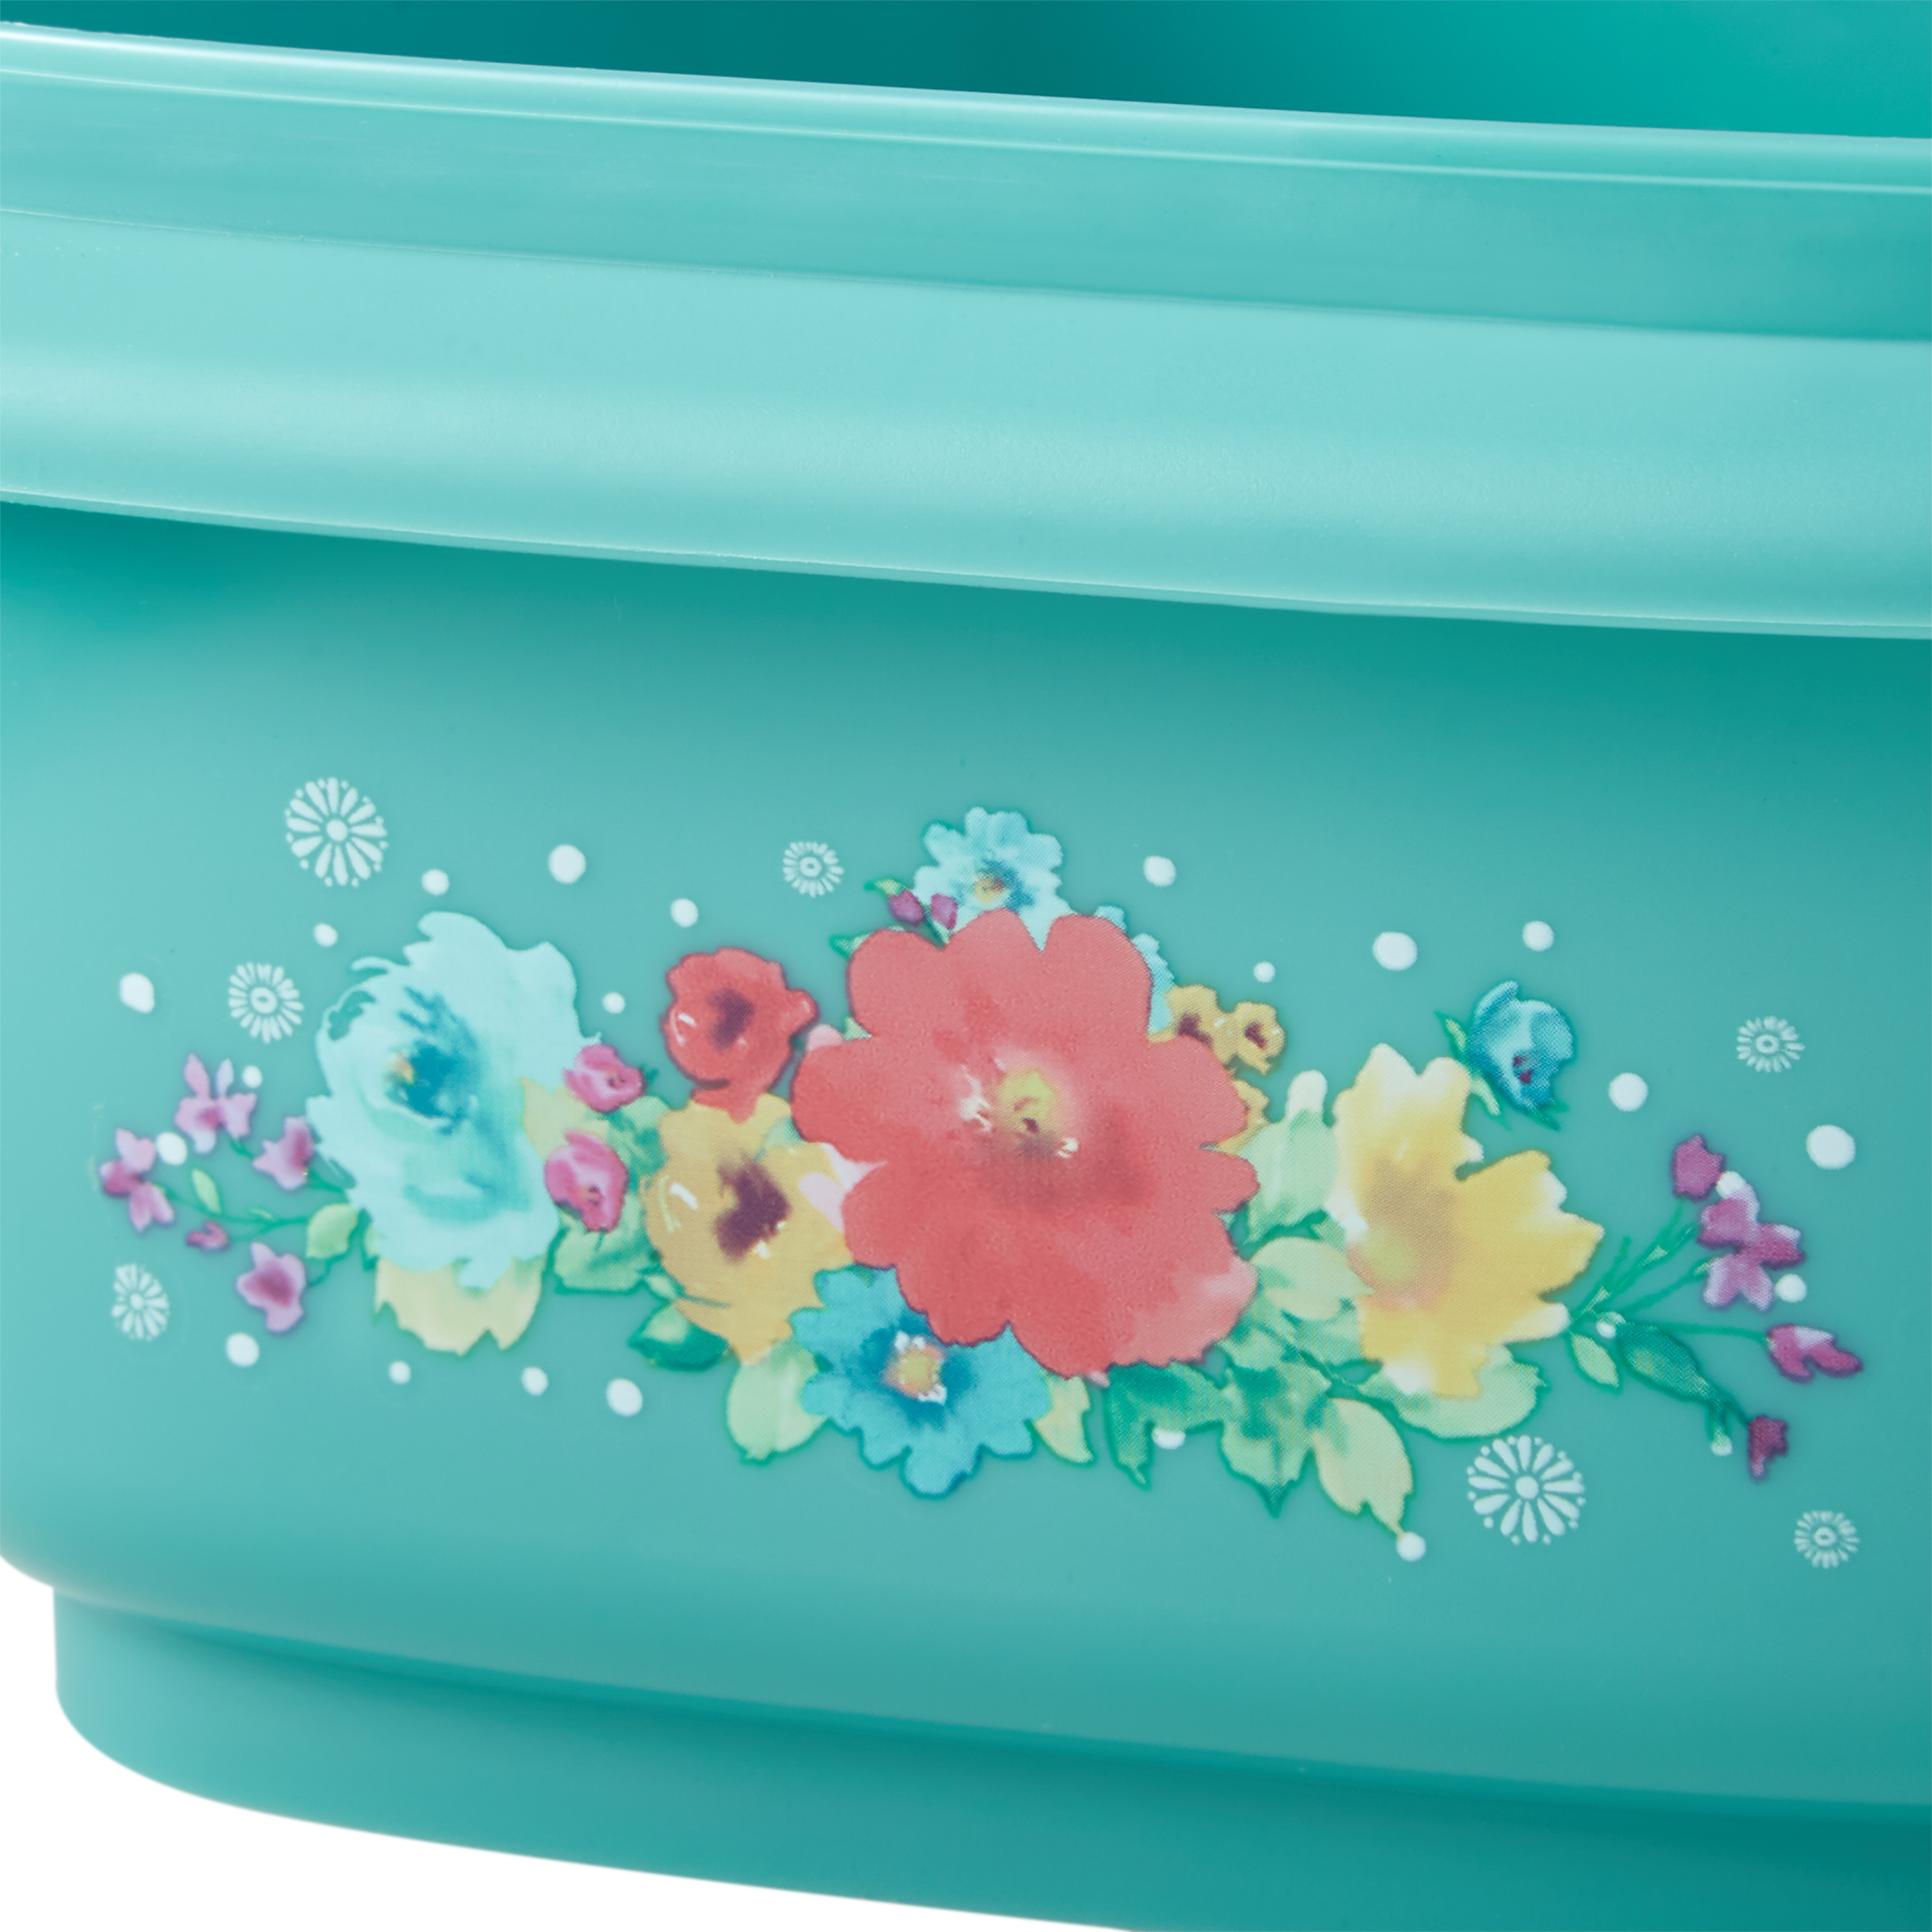 The Pioneer Woman 20 Piece Plastic Food Storage Container Variety Set, Breezy Blossom - image 3 of 5